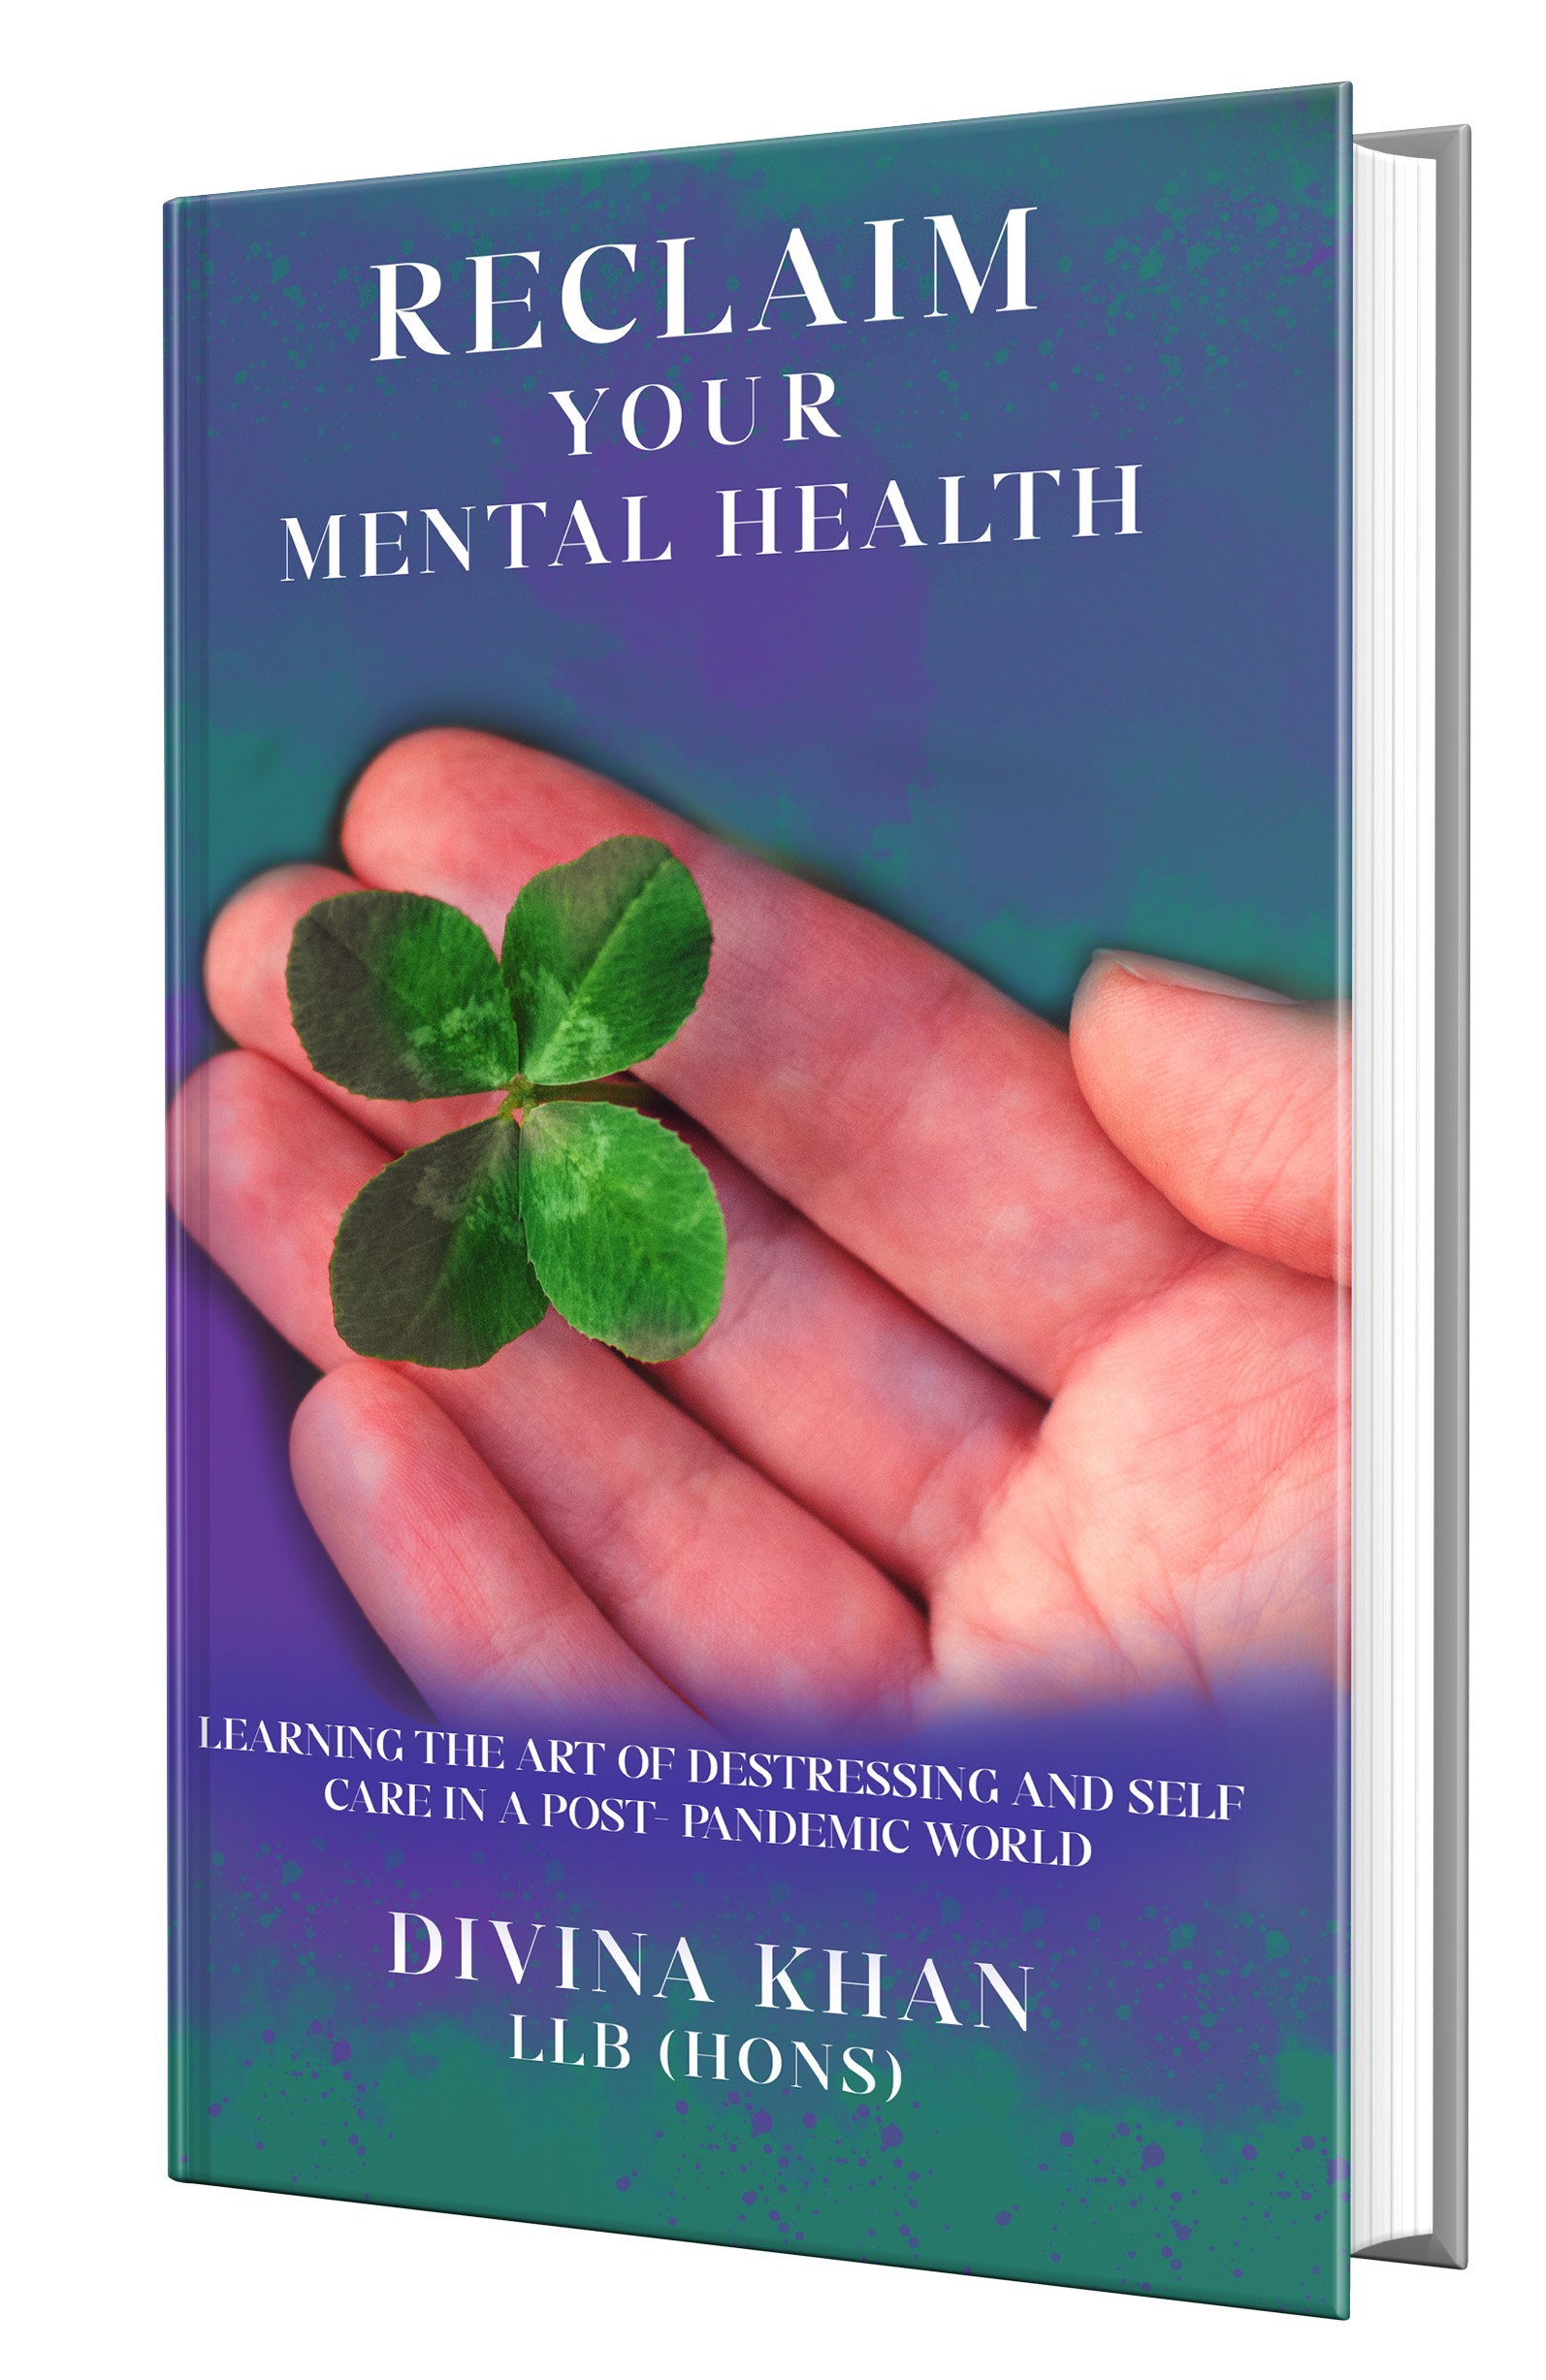 Author and Activist Divina Khan Releases Book "Reclaim Your Mental Health: Learning the Art of Destressing and Self-care in a Post-pandemic World"